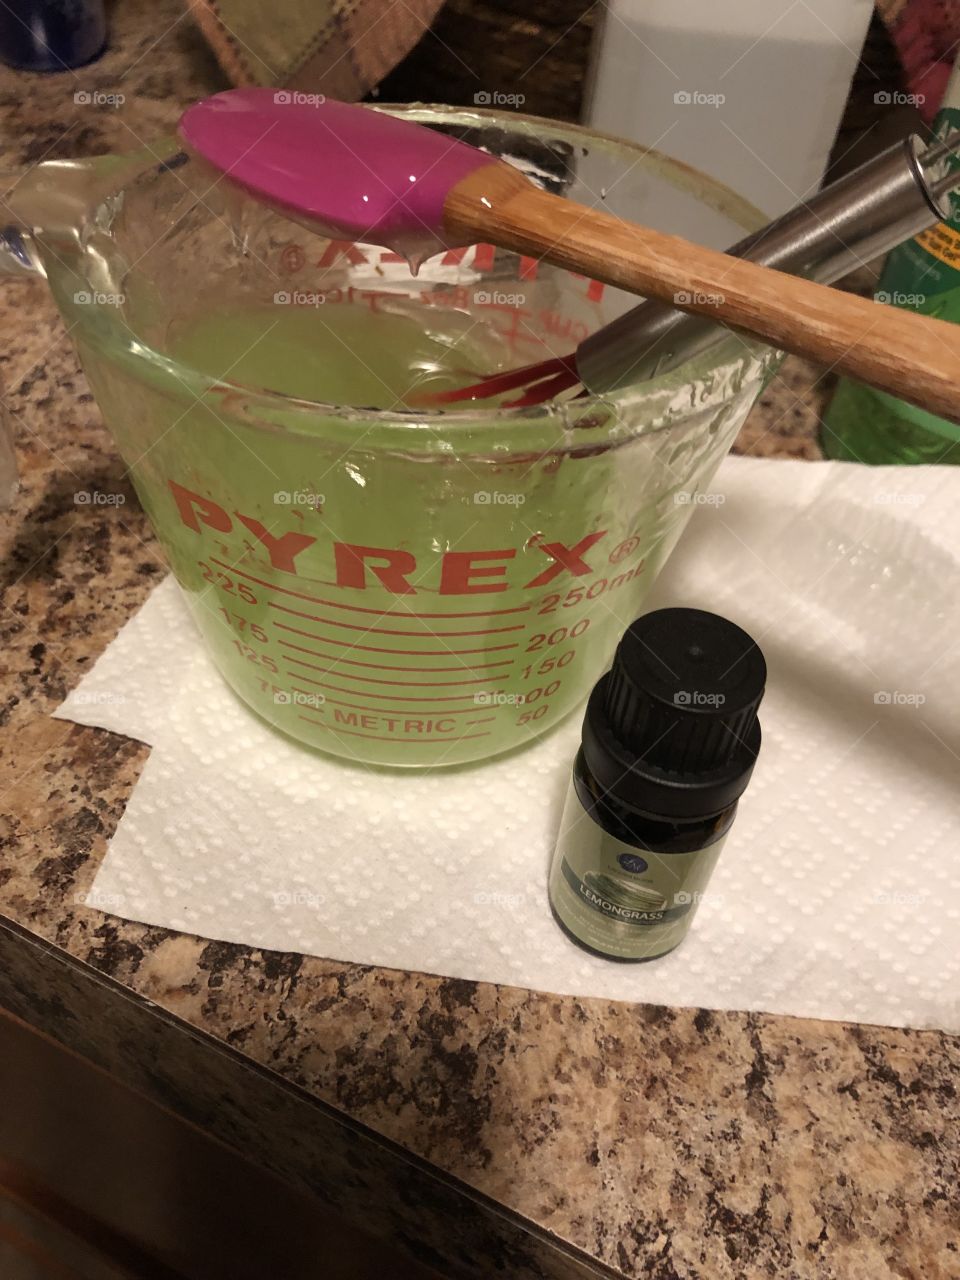 Homemade hand sanitizer germ protection 